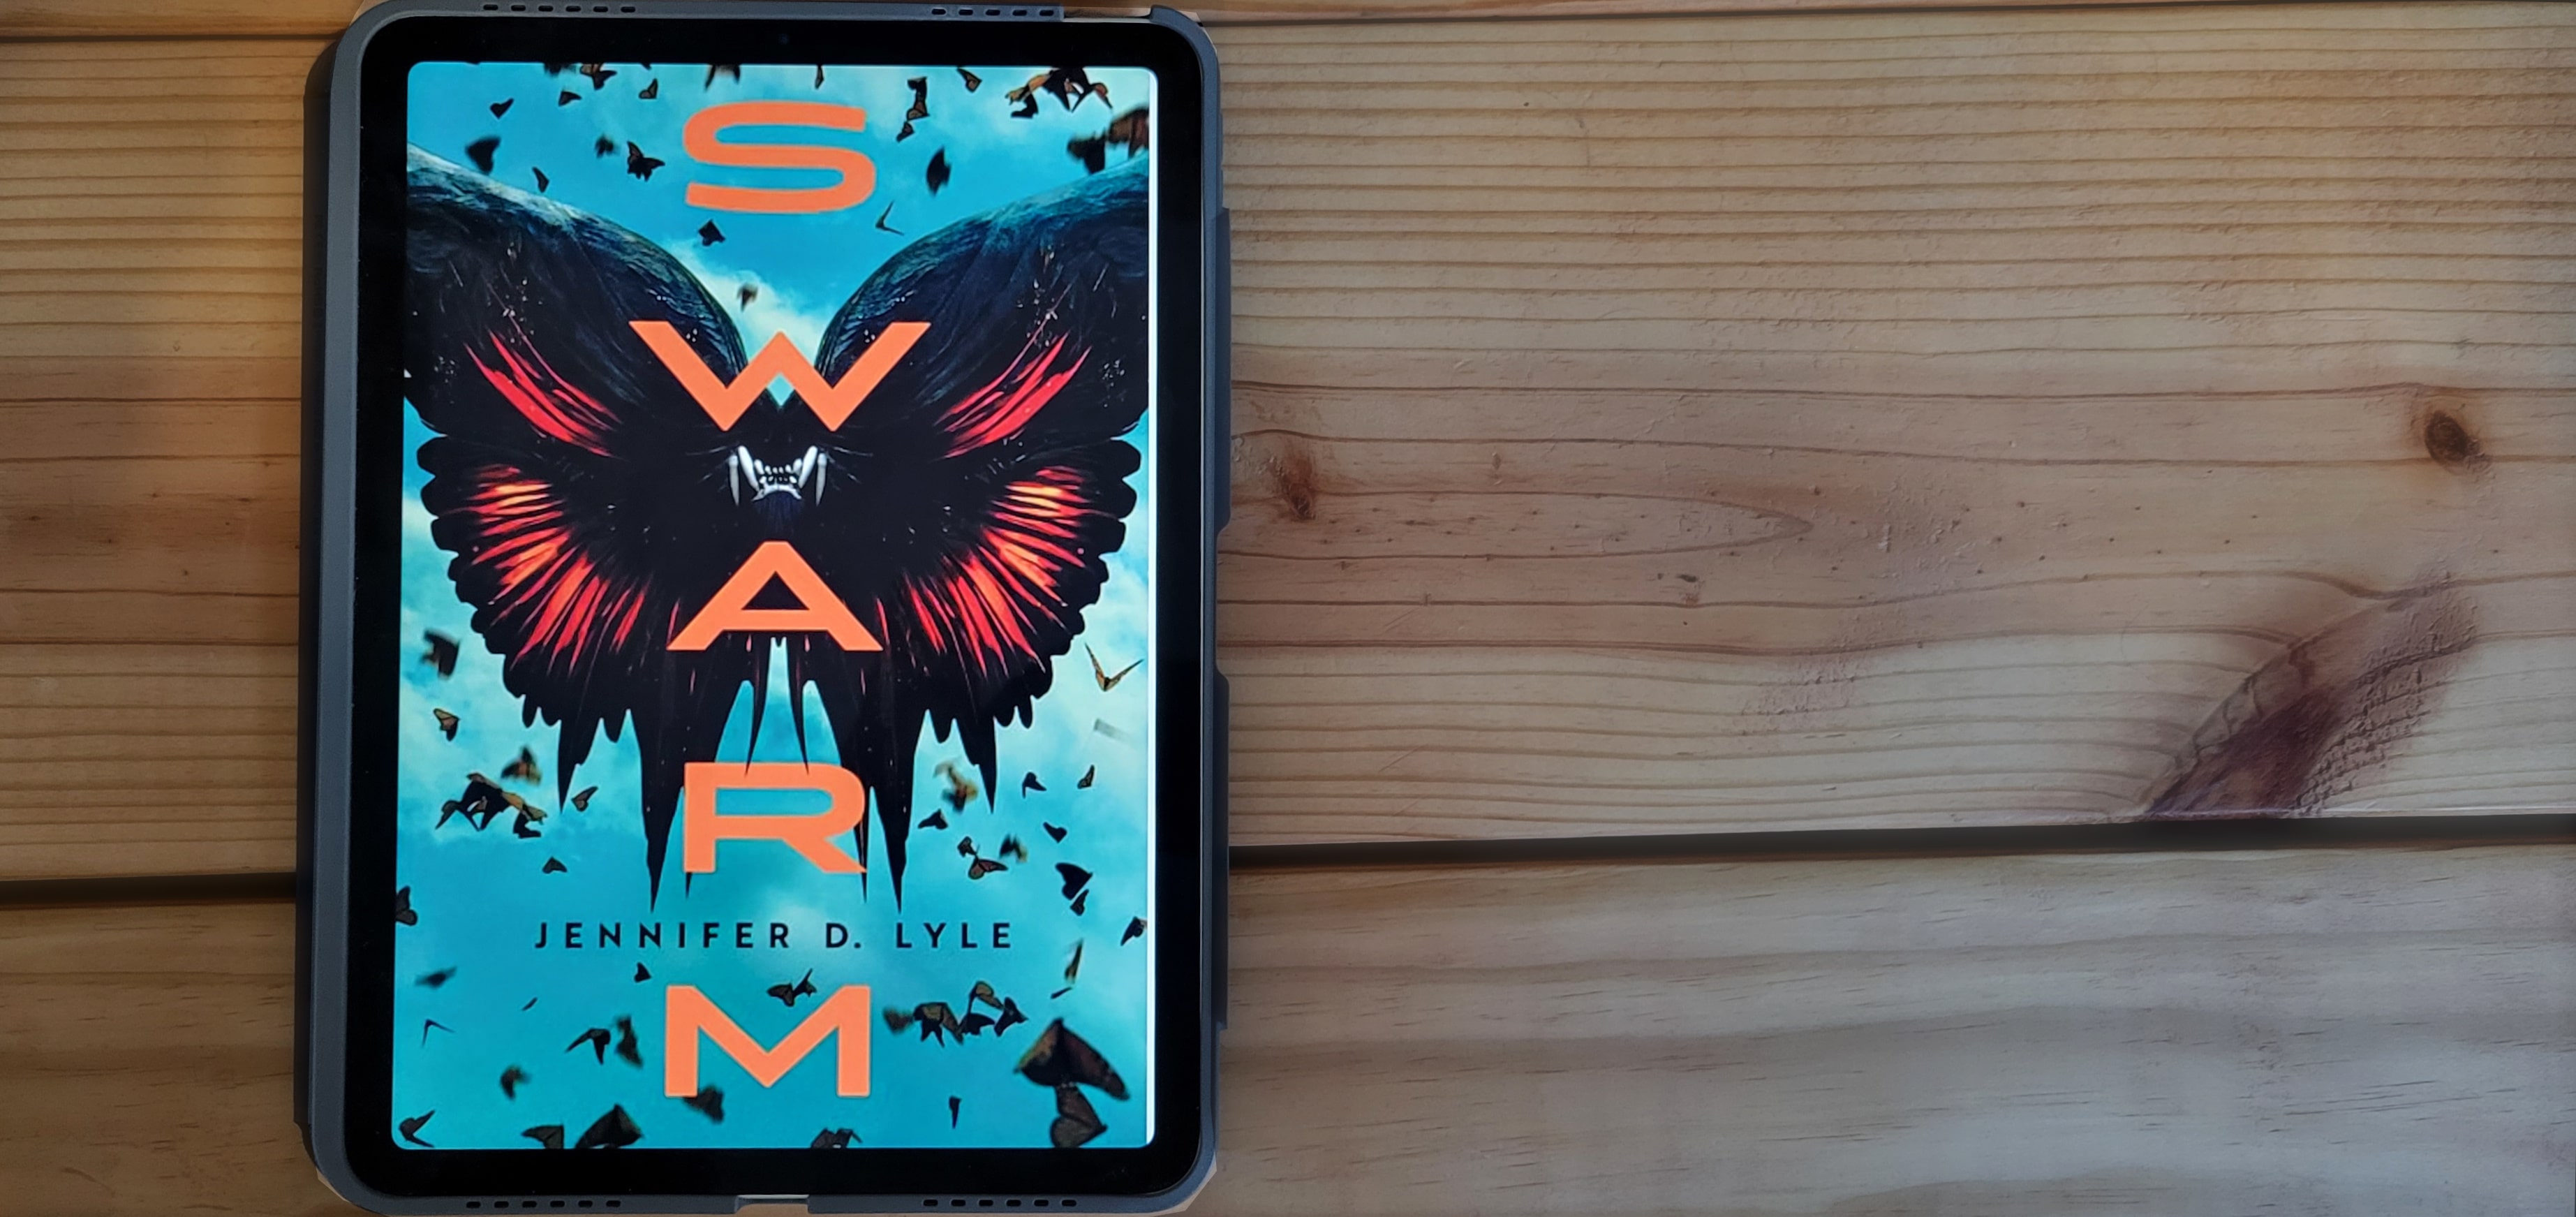 Book cover of Swarm by Jennifer D. Lyle